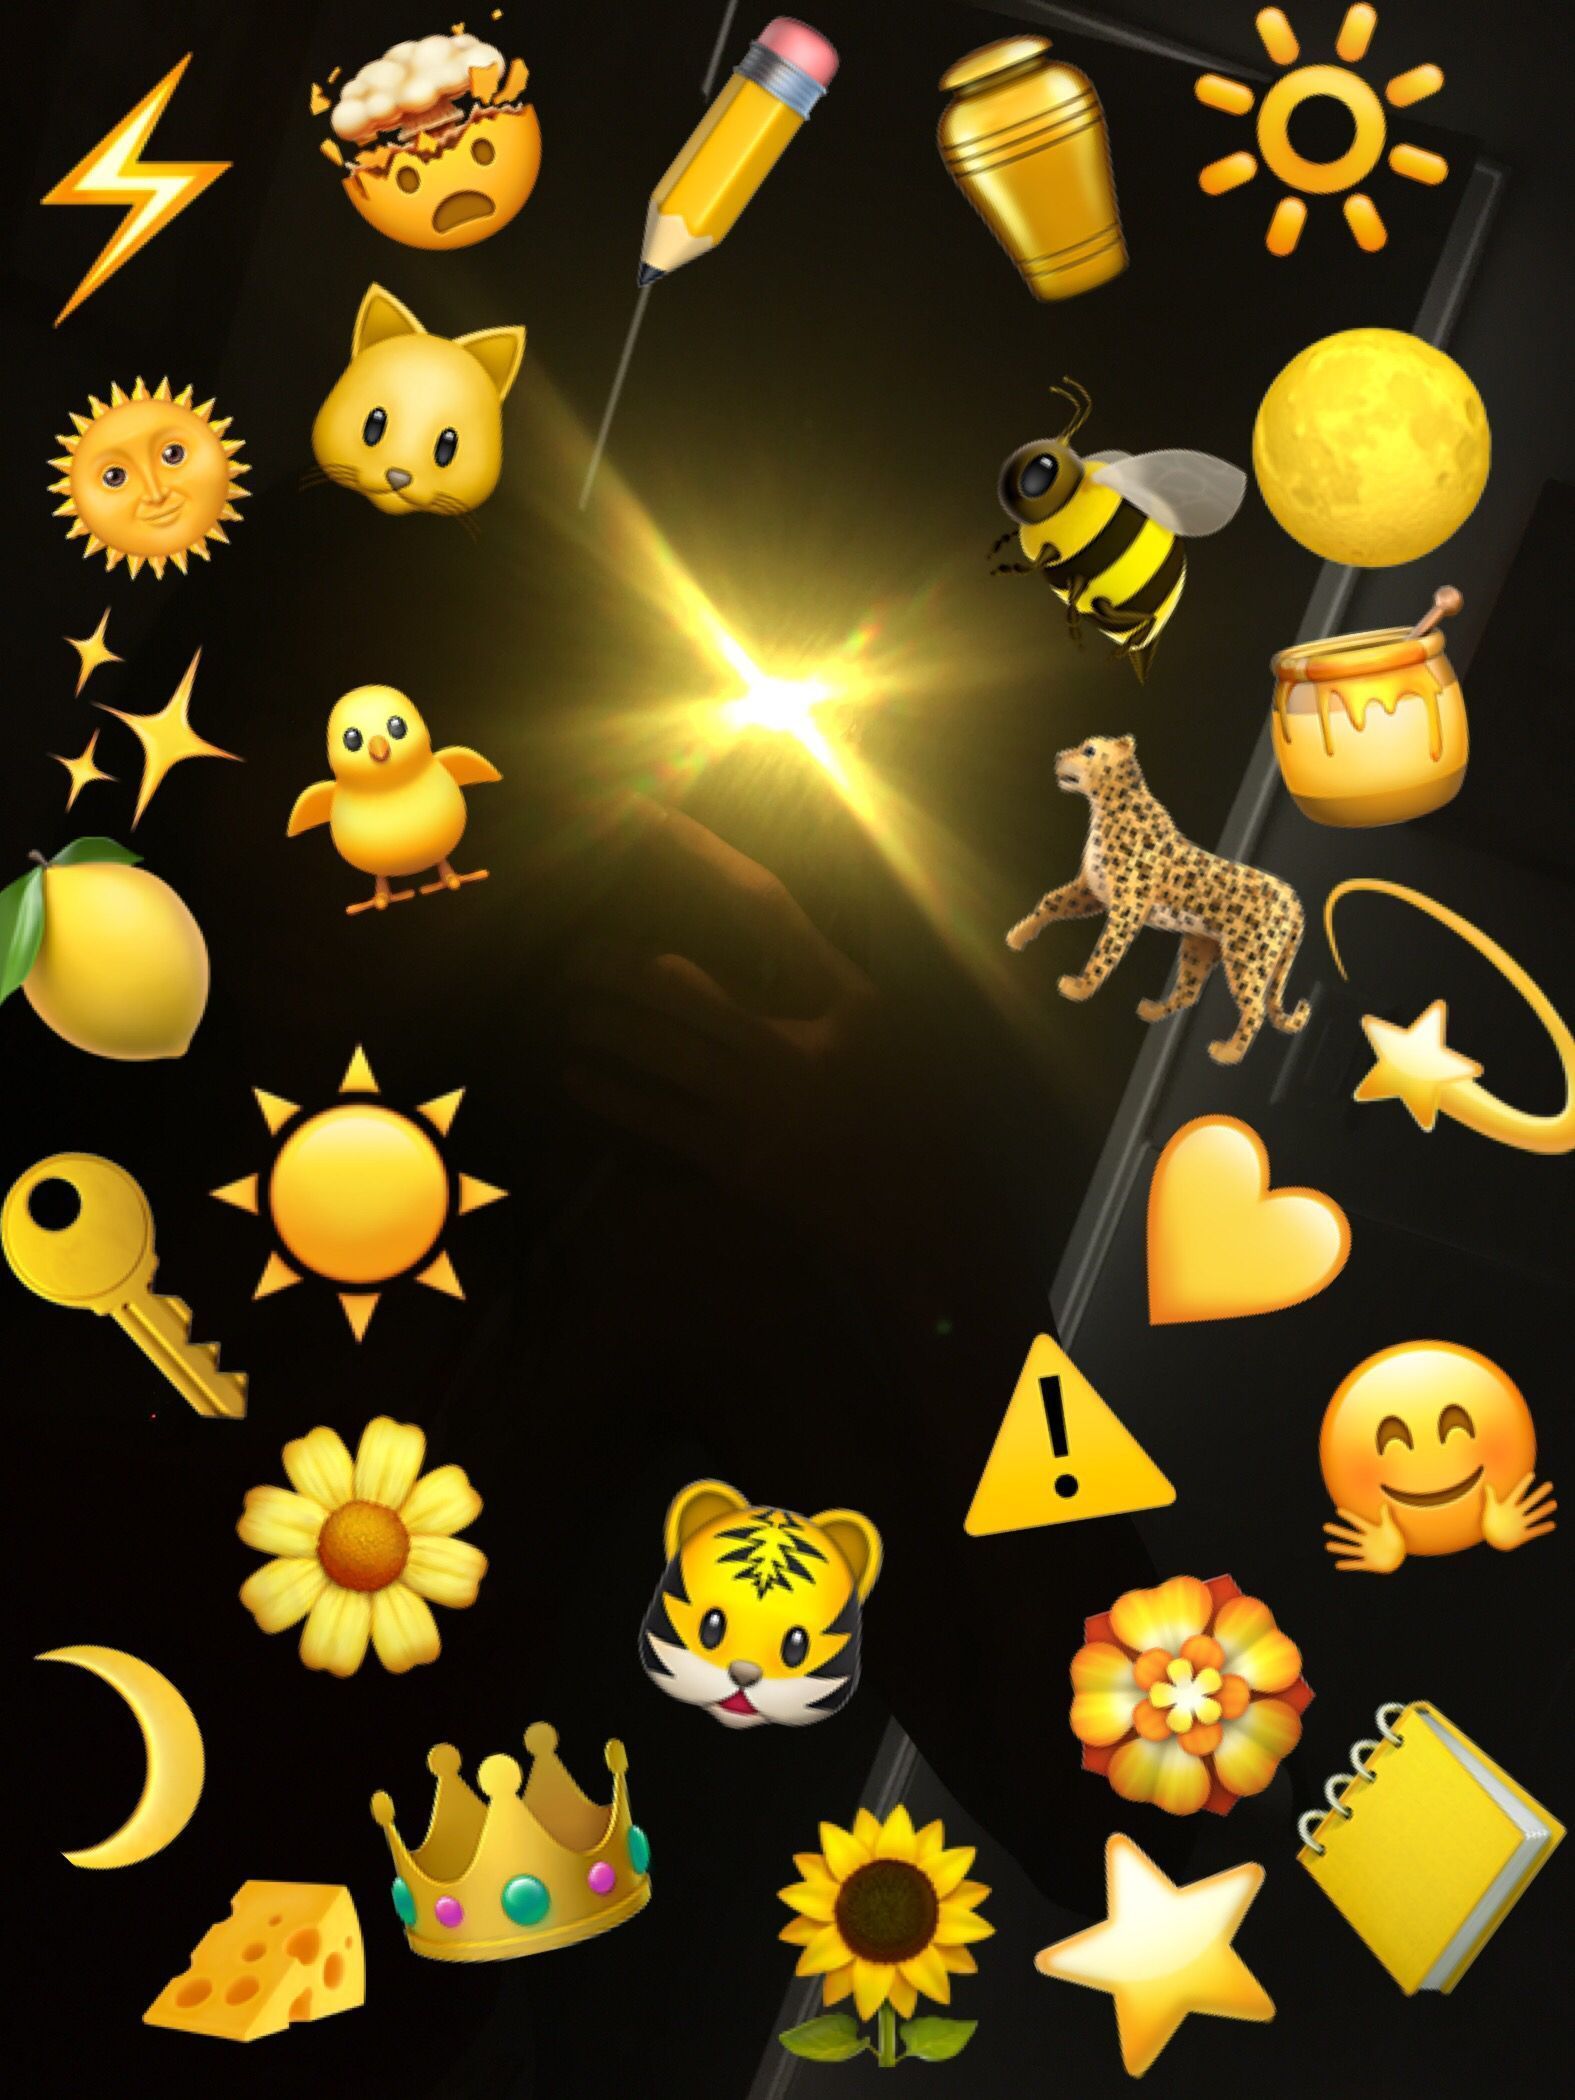 A picture of many different emoticons on the screen - Emoji, sunshine